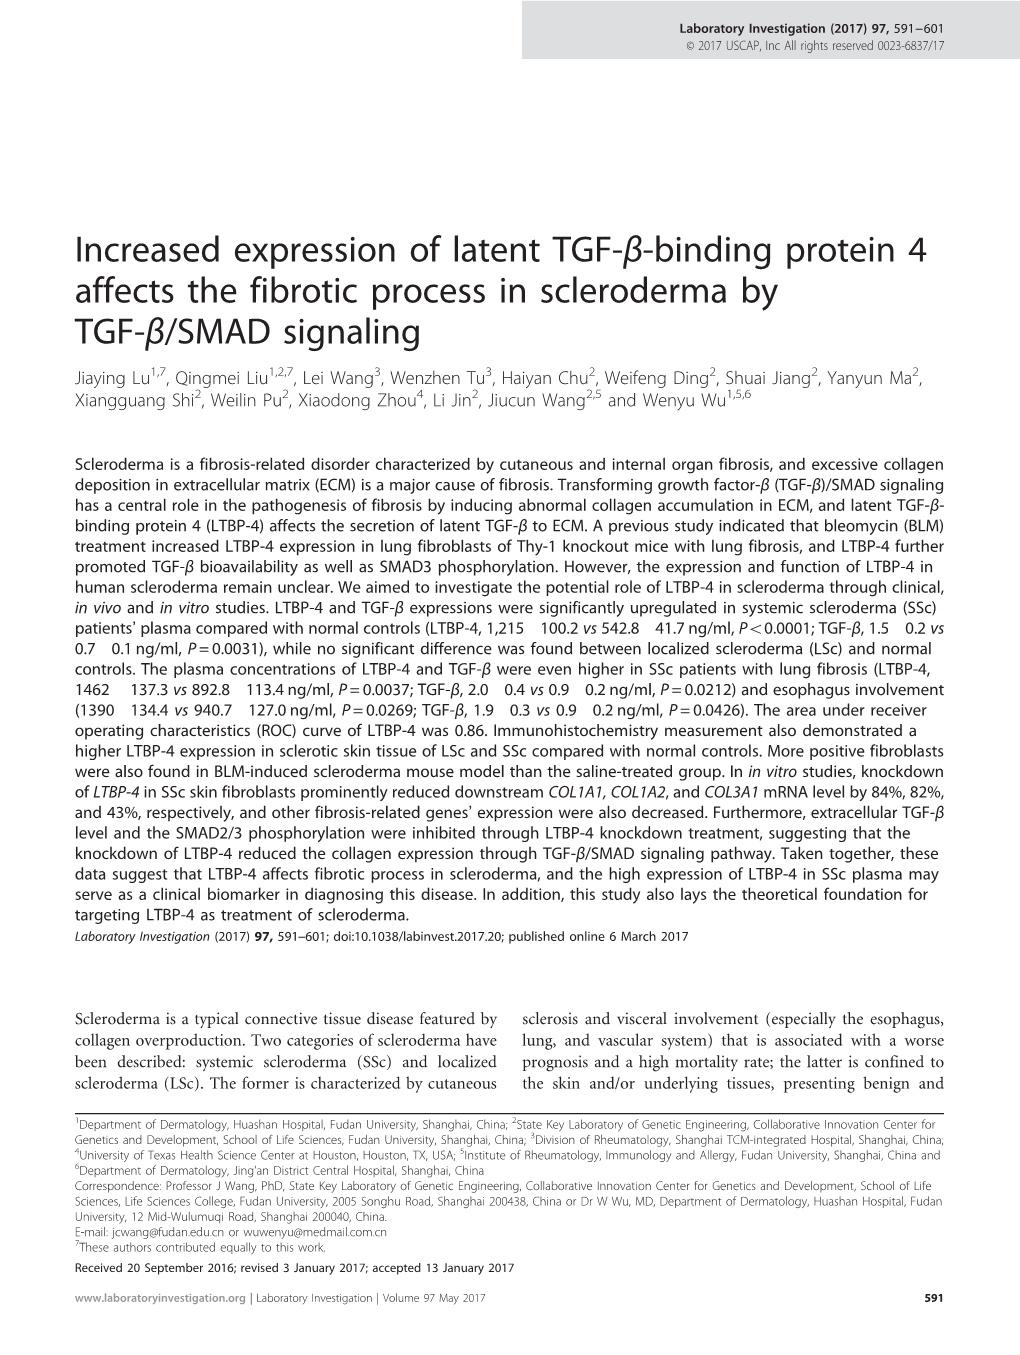 Increased Expression of Latent TGF-&Beta